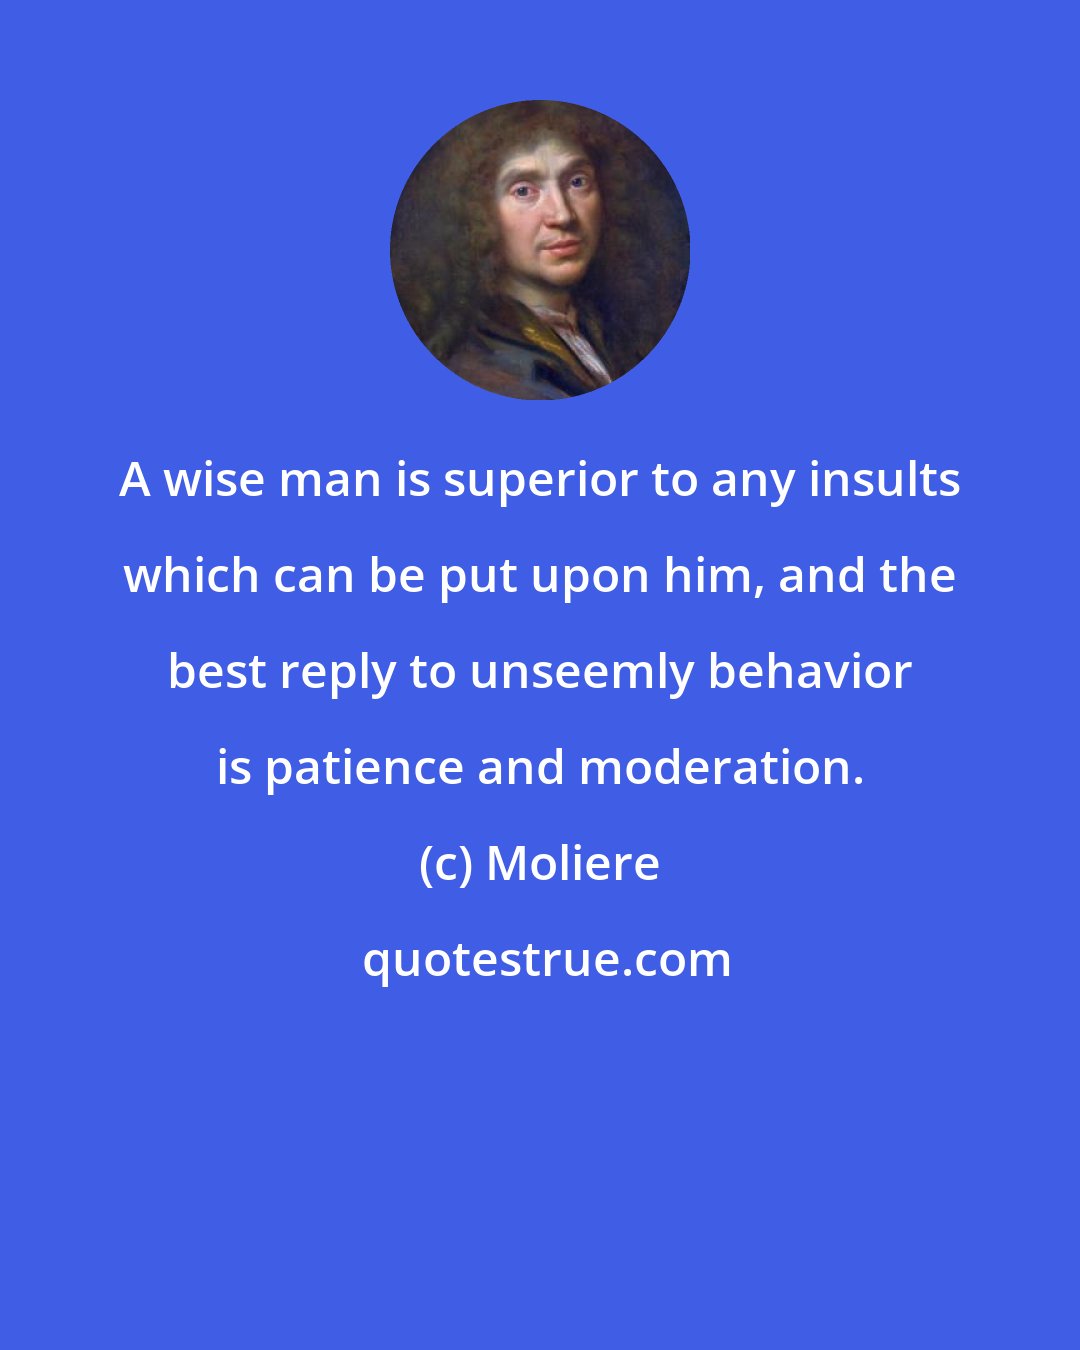 Moliere: A wise man is superior to any insults which can be put upon him, and the best reply to unseemly behavior is patience and moderation.